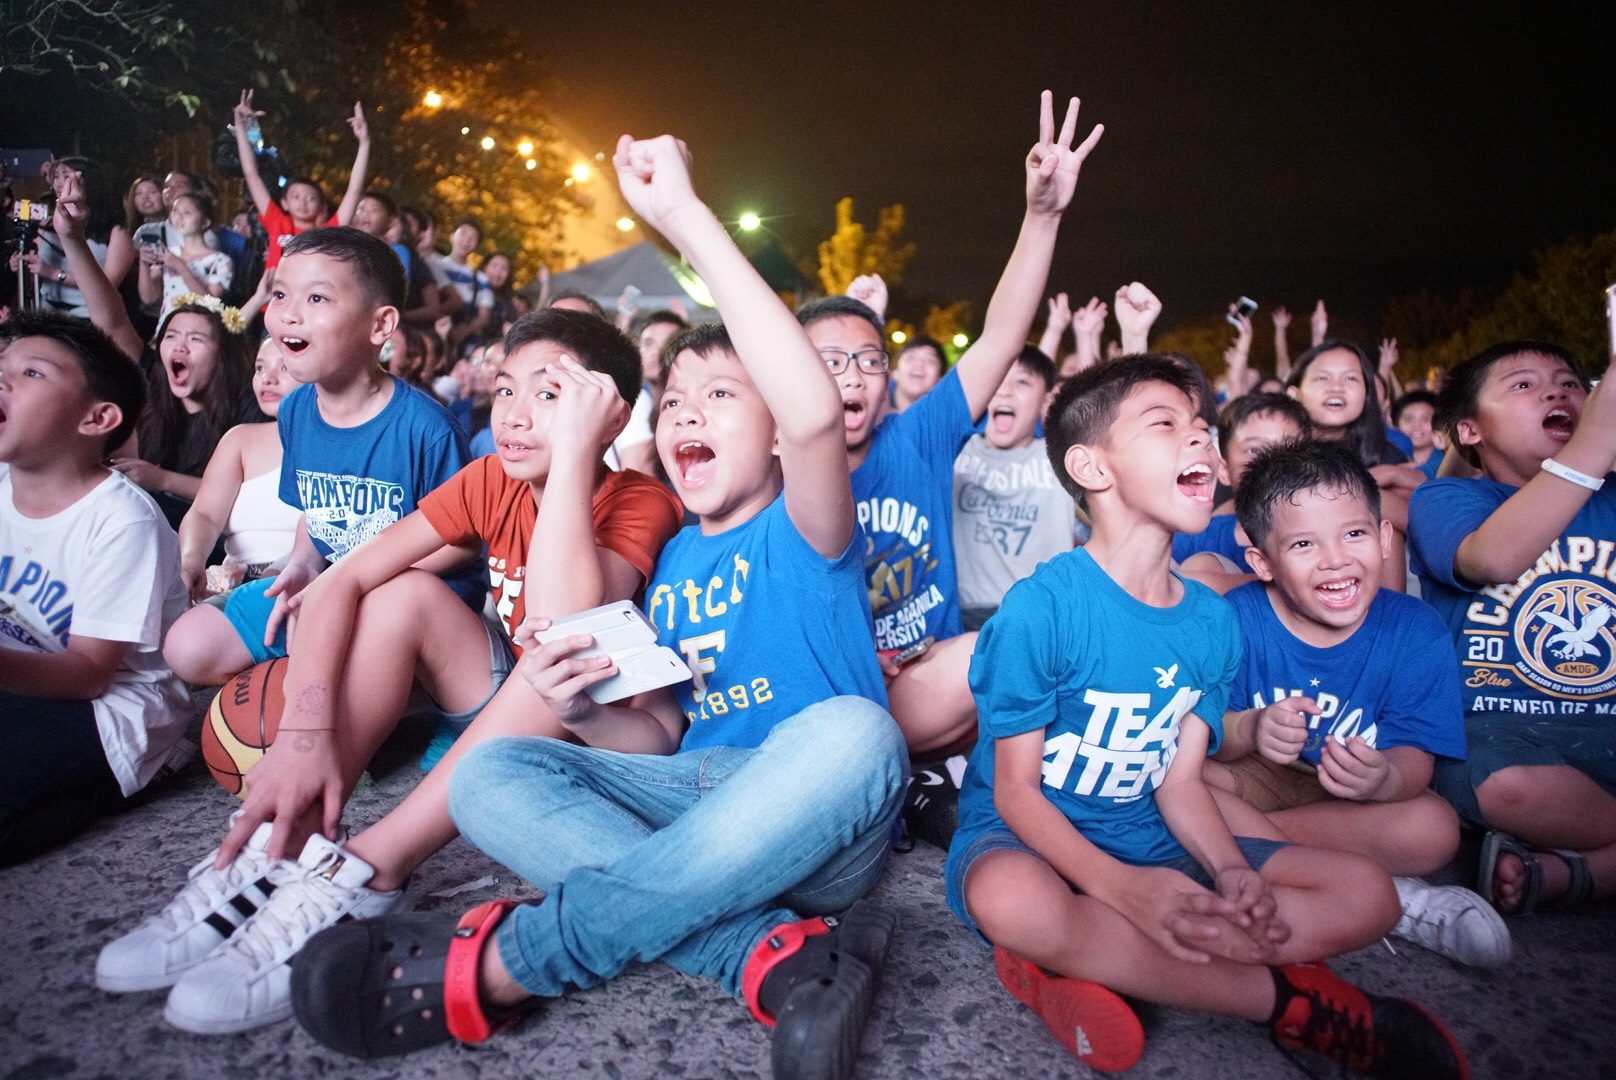 EXCITEMENT. The young Ateneo fans flock the center stage area in excitement to meet their basketball idols. Photo by Martin San Diego/Rappler 